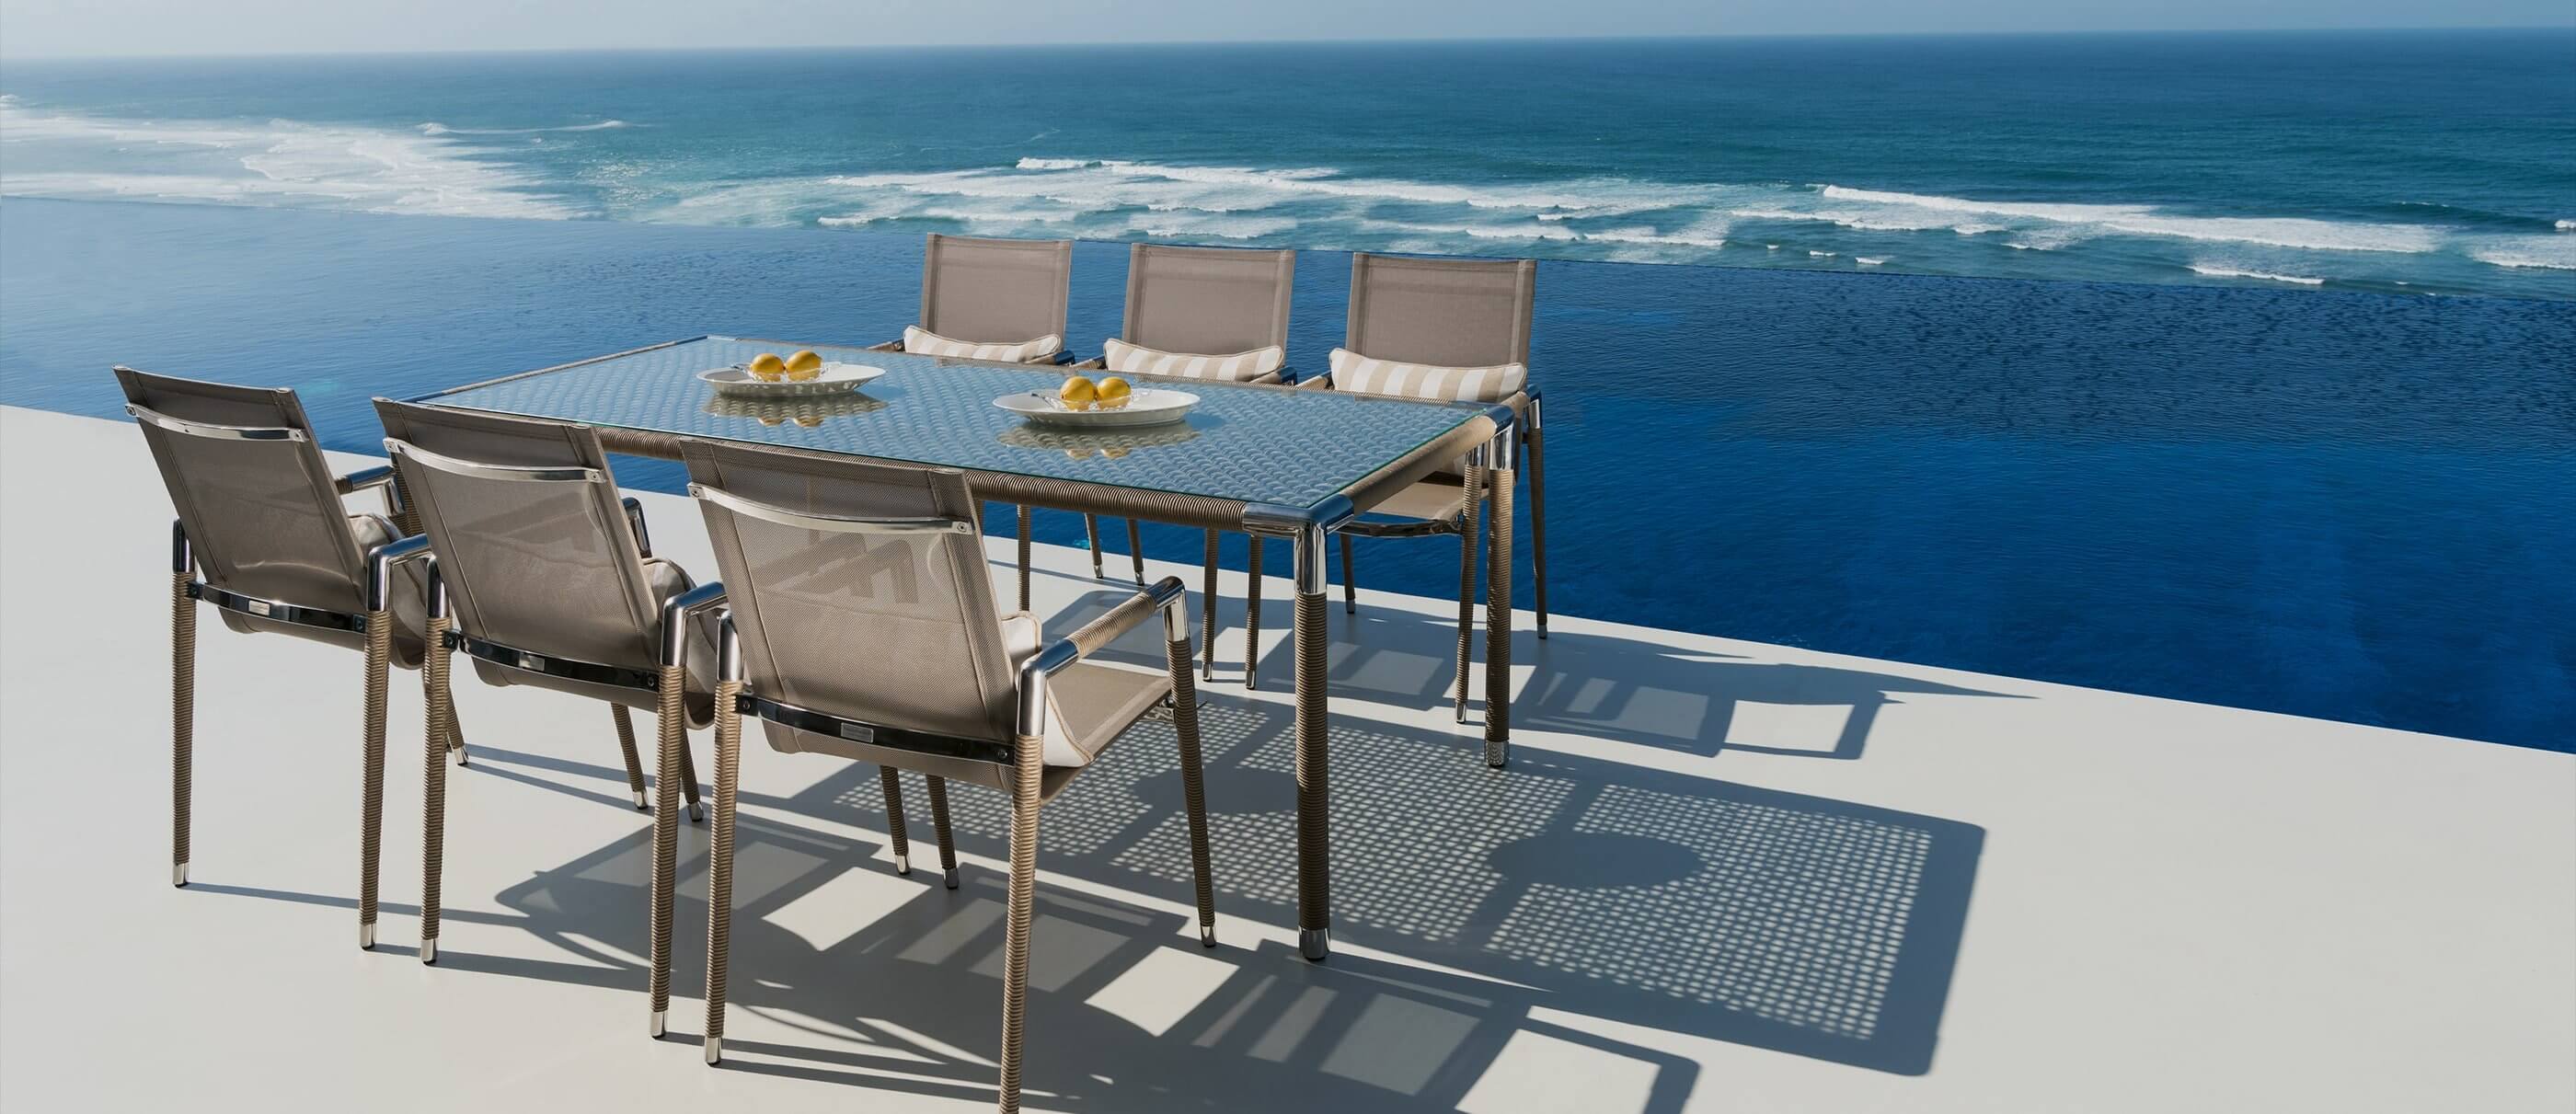 Indian Ocean furniture: luxury outdoor dining set with the ocean in the background